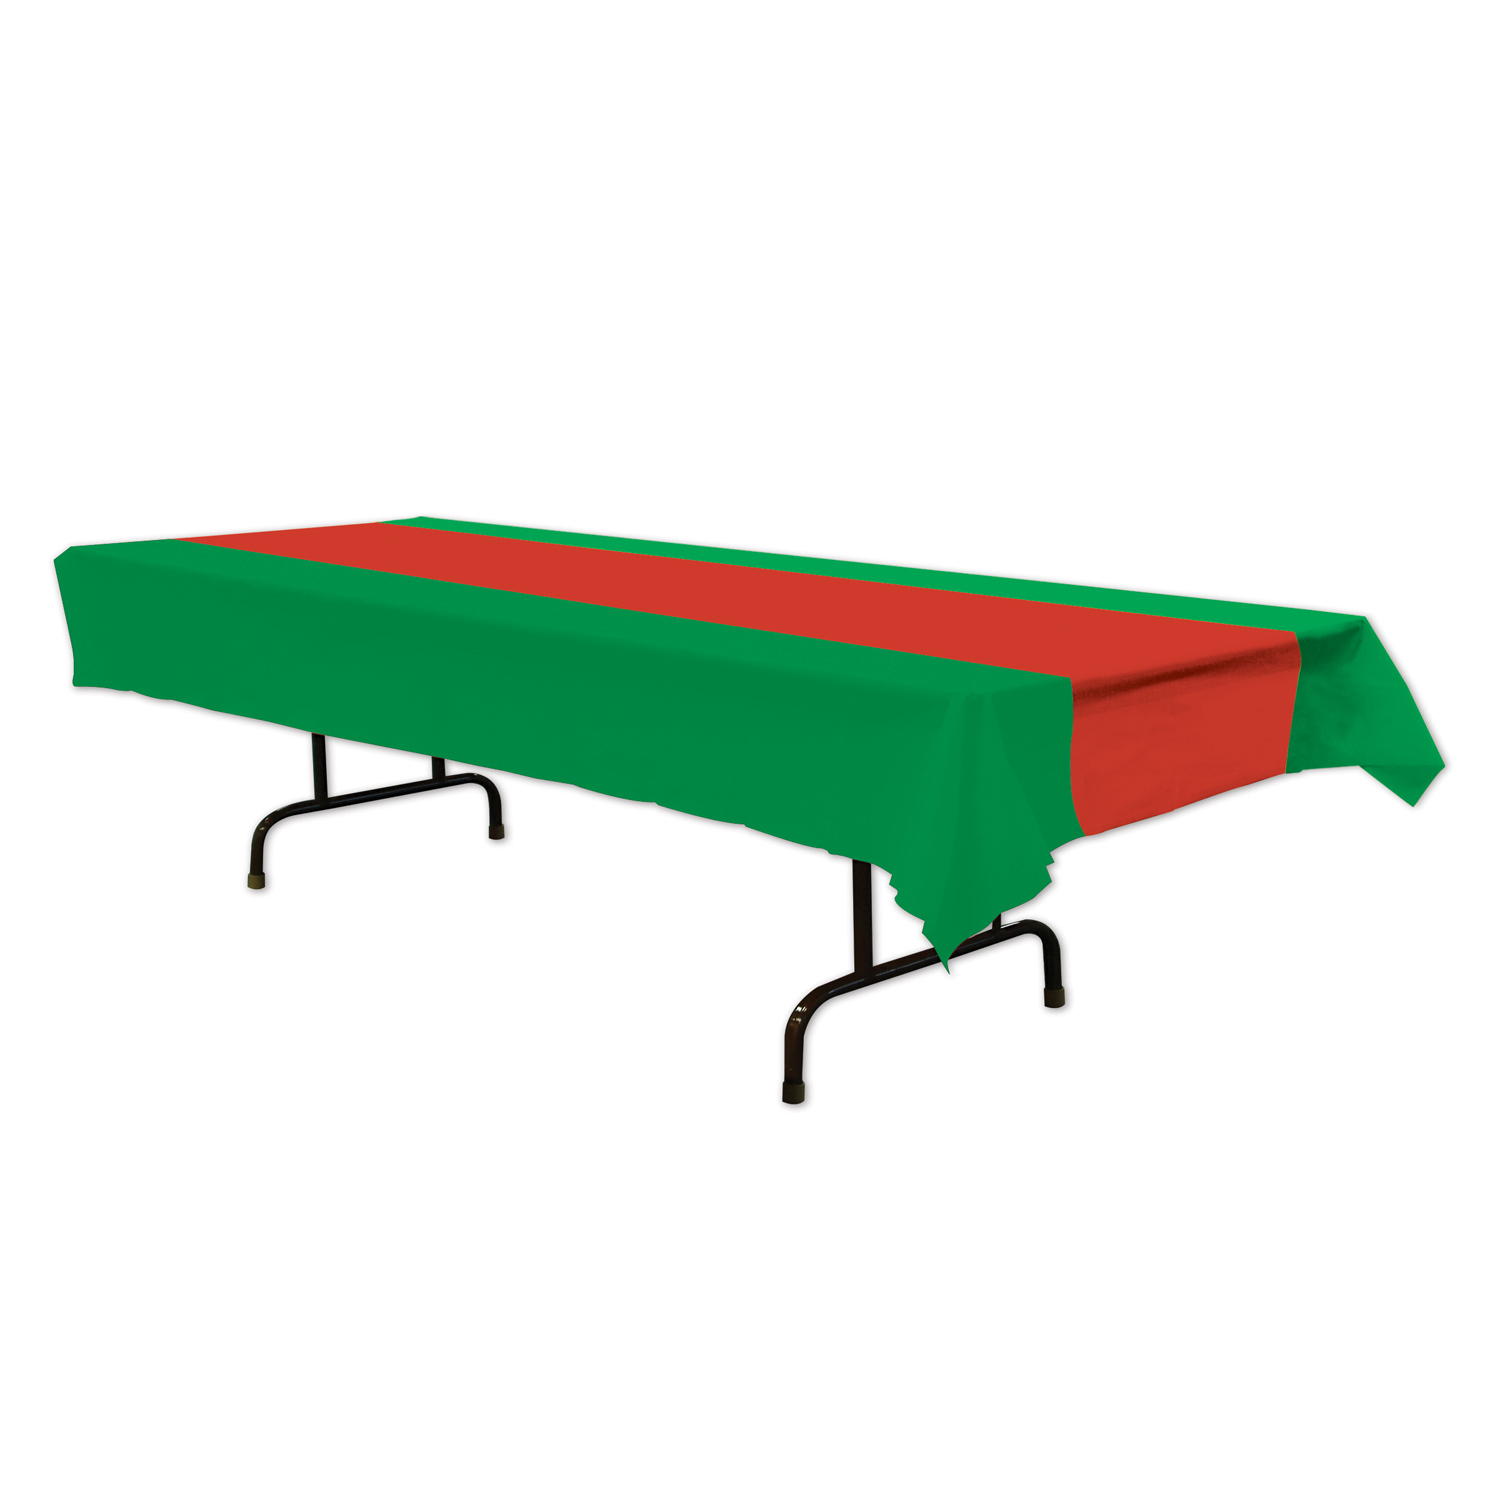 red and green plastic table cover